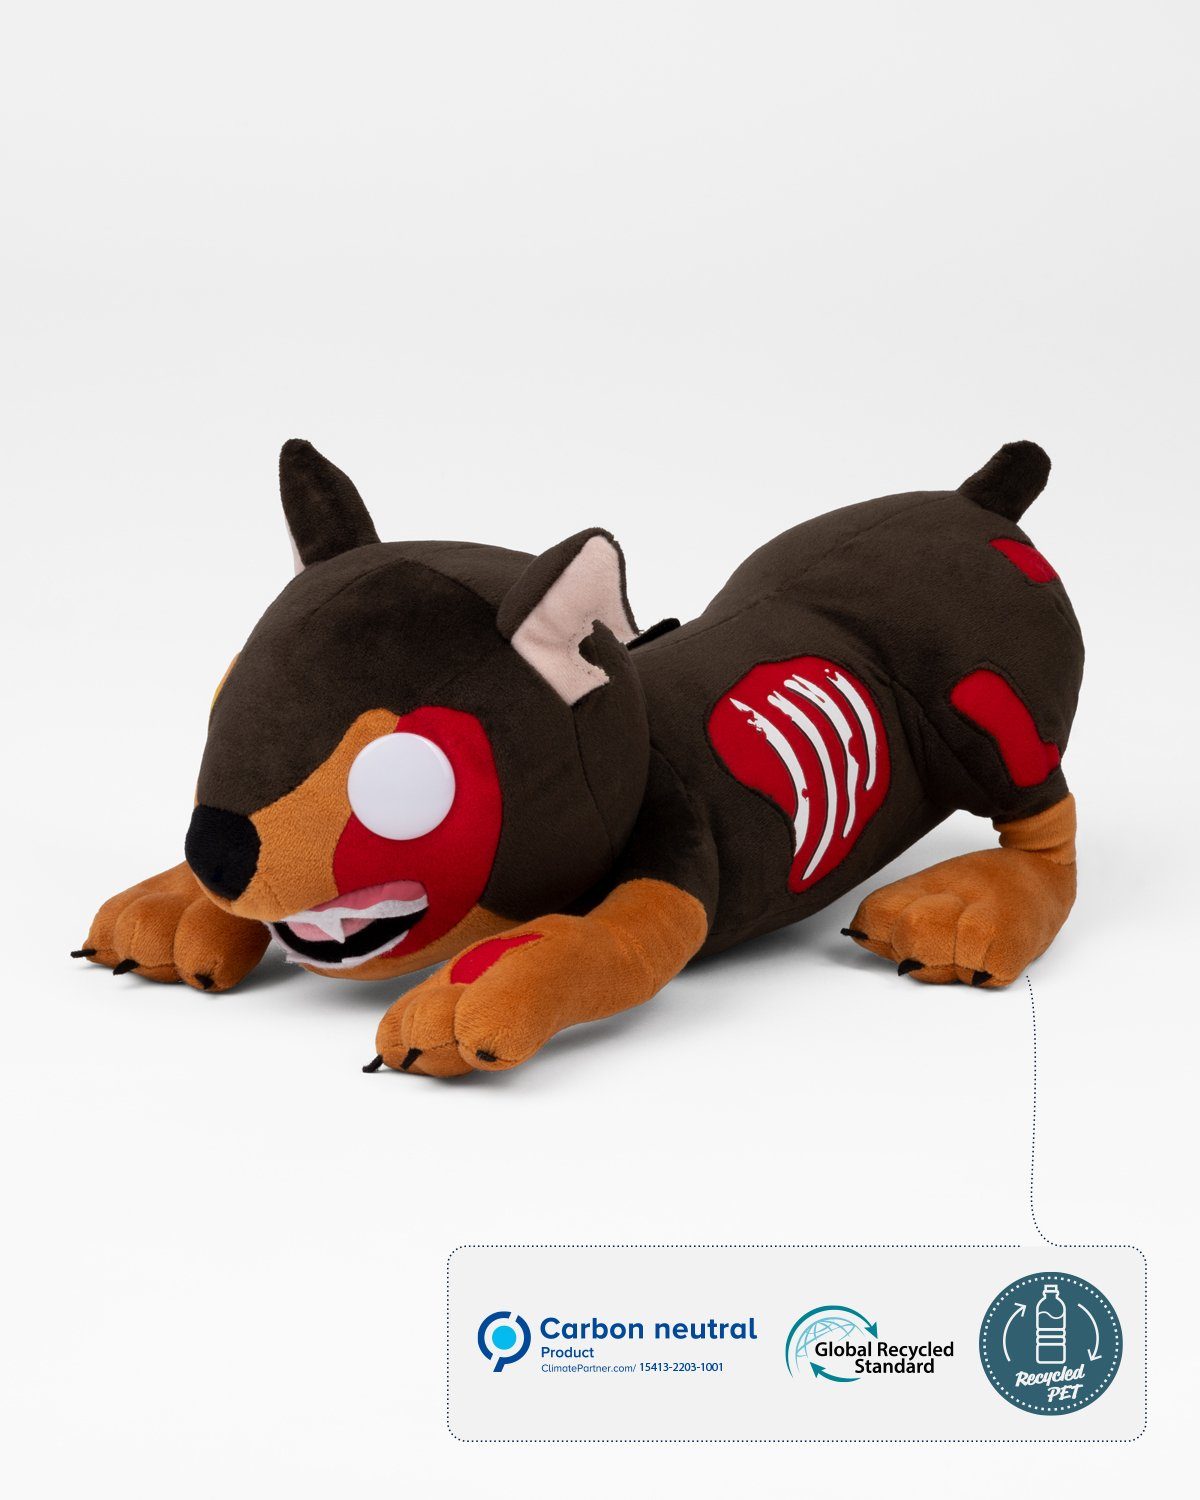 iTEMLAB Kuscheltier Resident Evil "Cerberus" Collectible, enthält recyceltes Material (Global Recycled Standard)